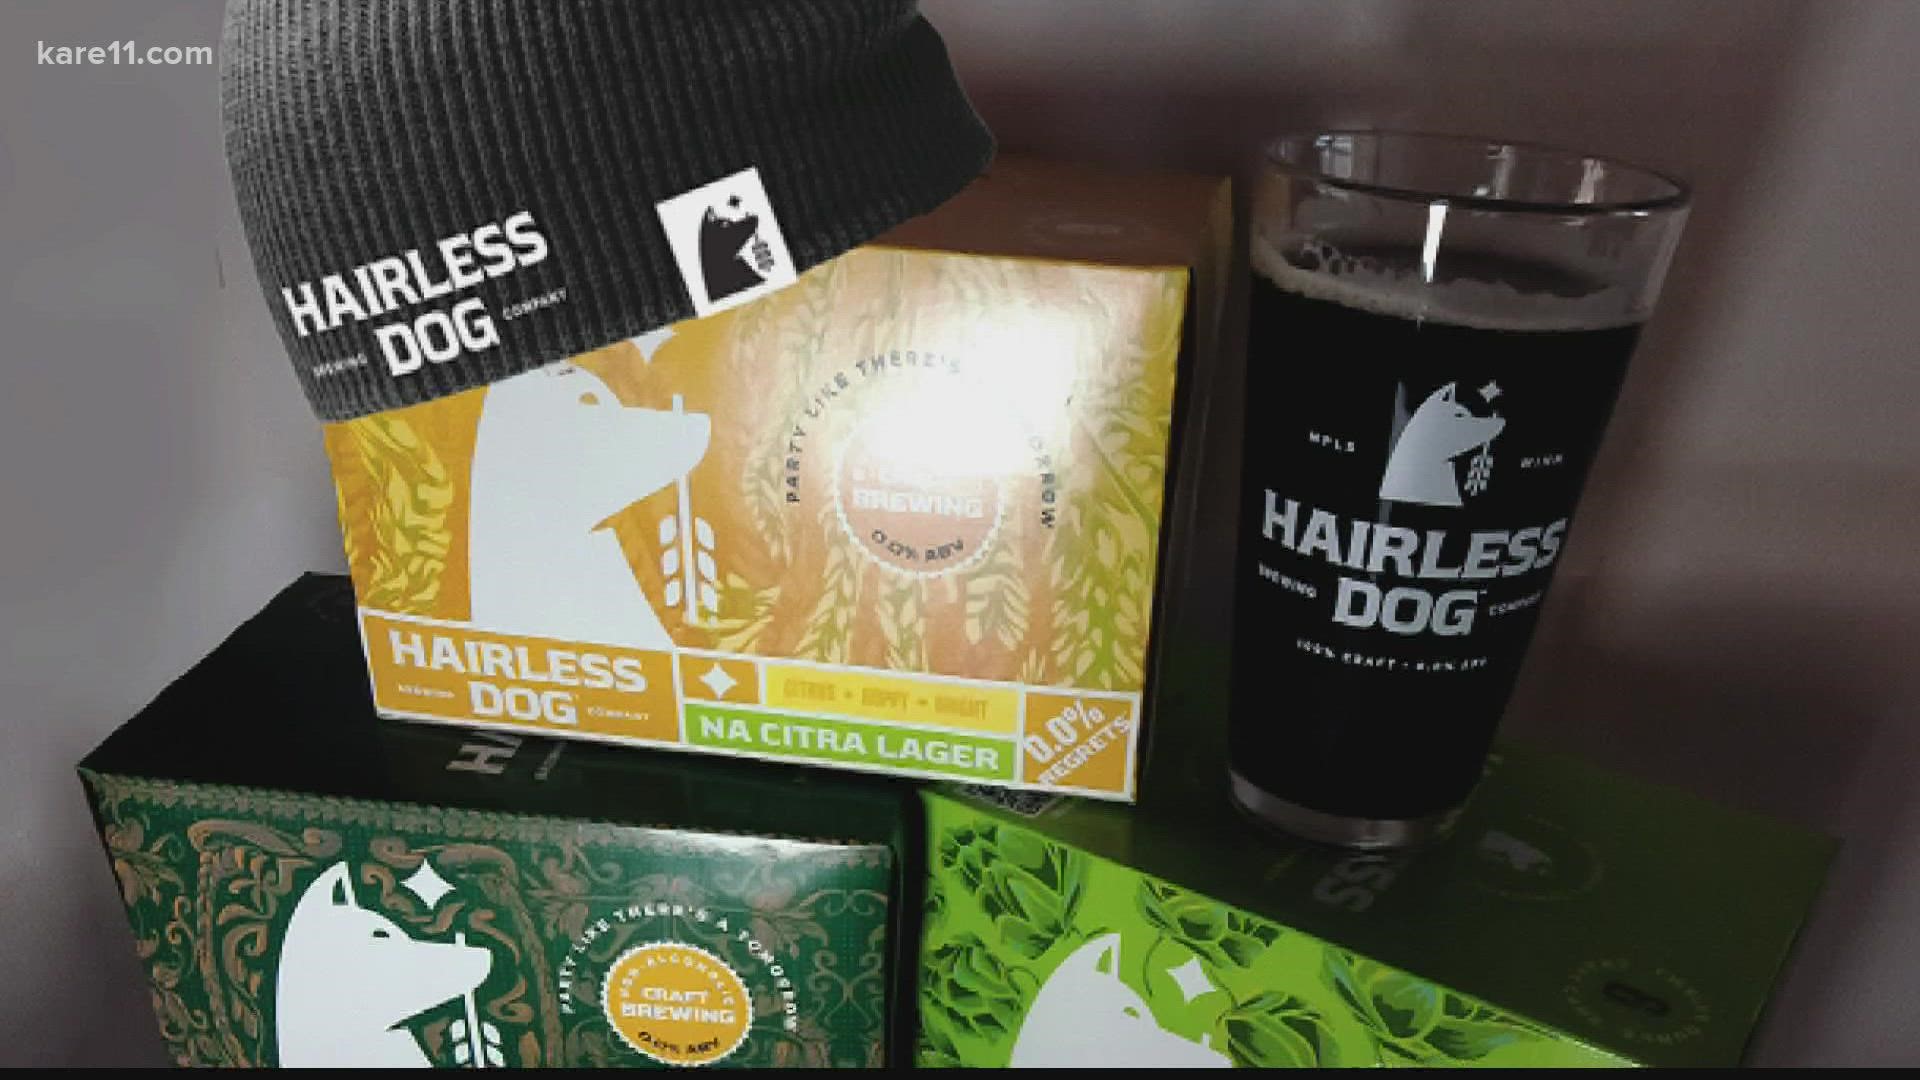 Hairless Dog Brewing in Minneapolis is helping you stick to your New Year's resolutions with these N.A. beers.